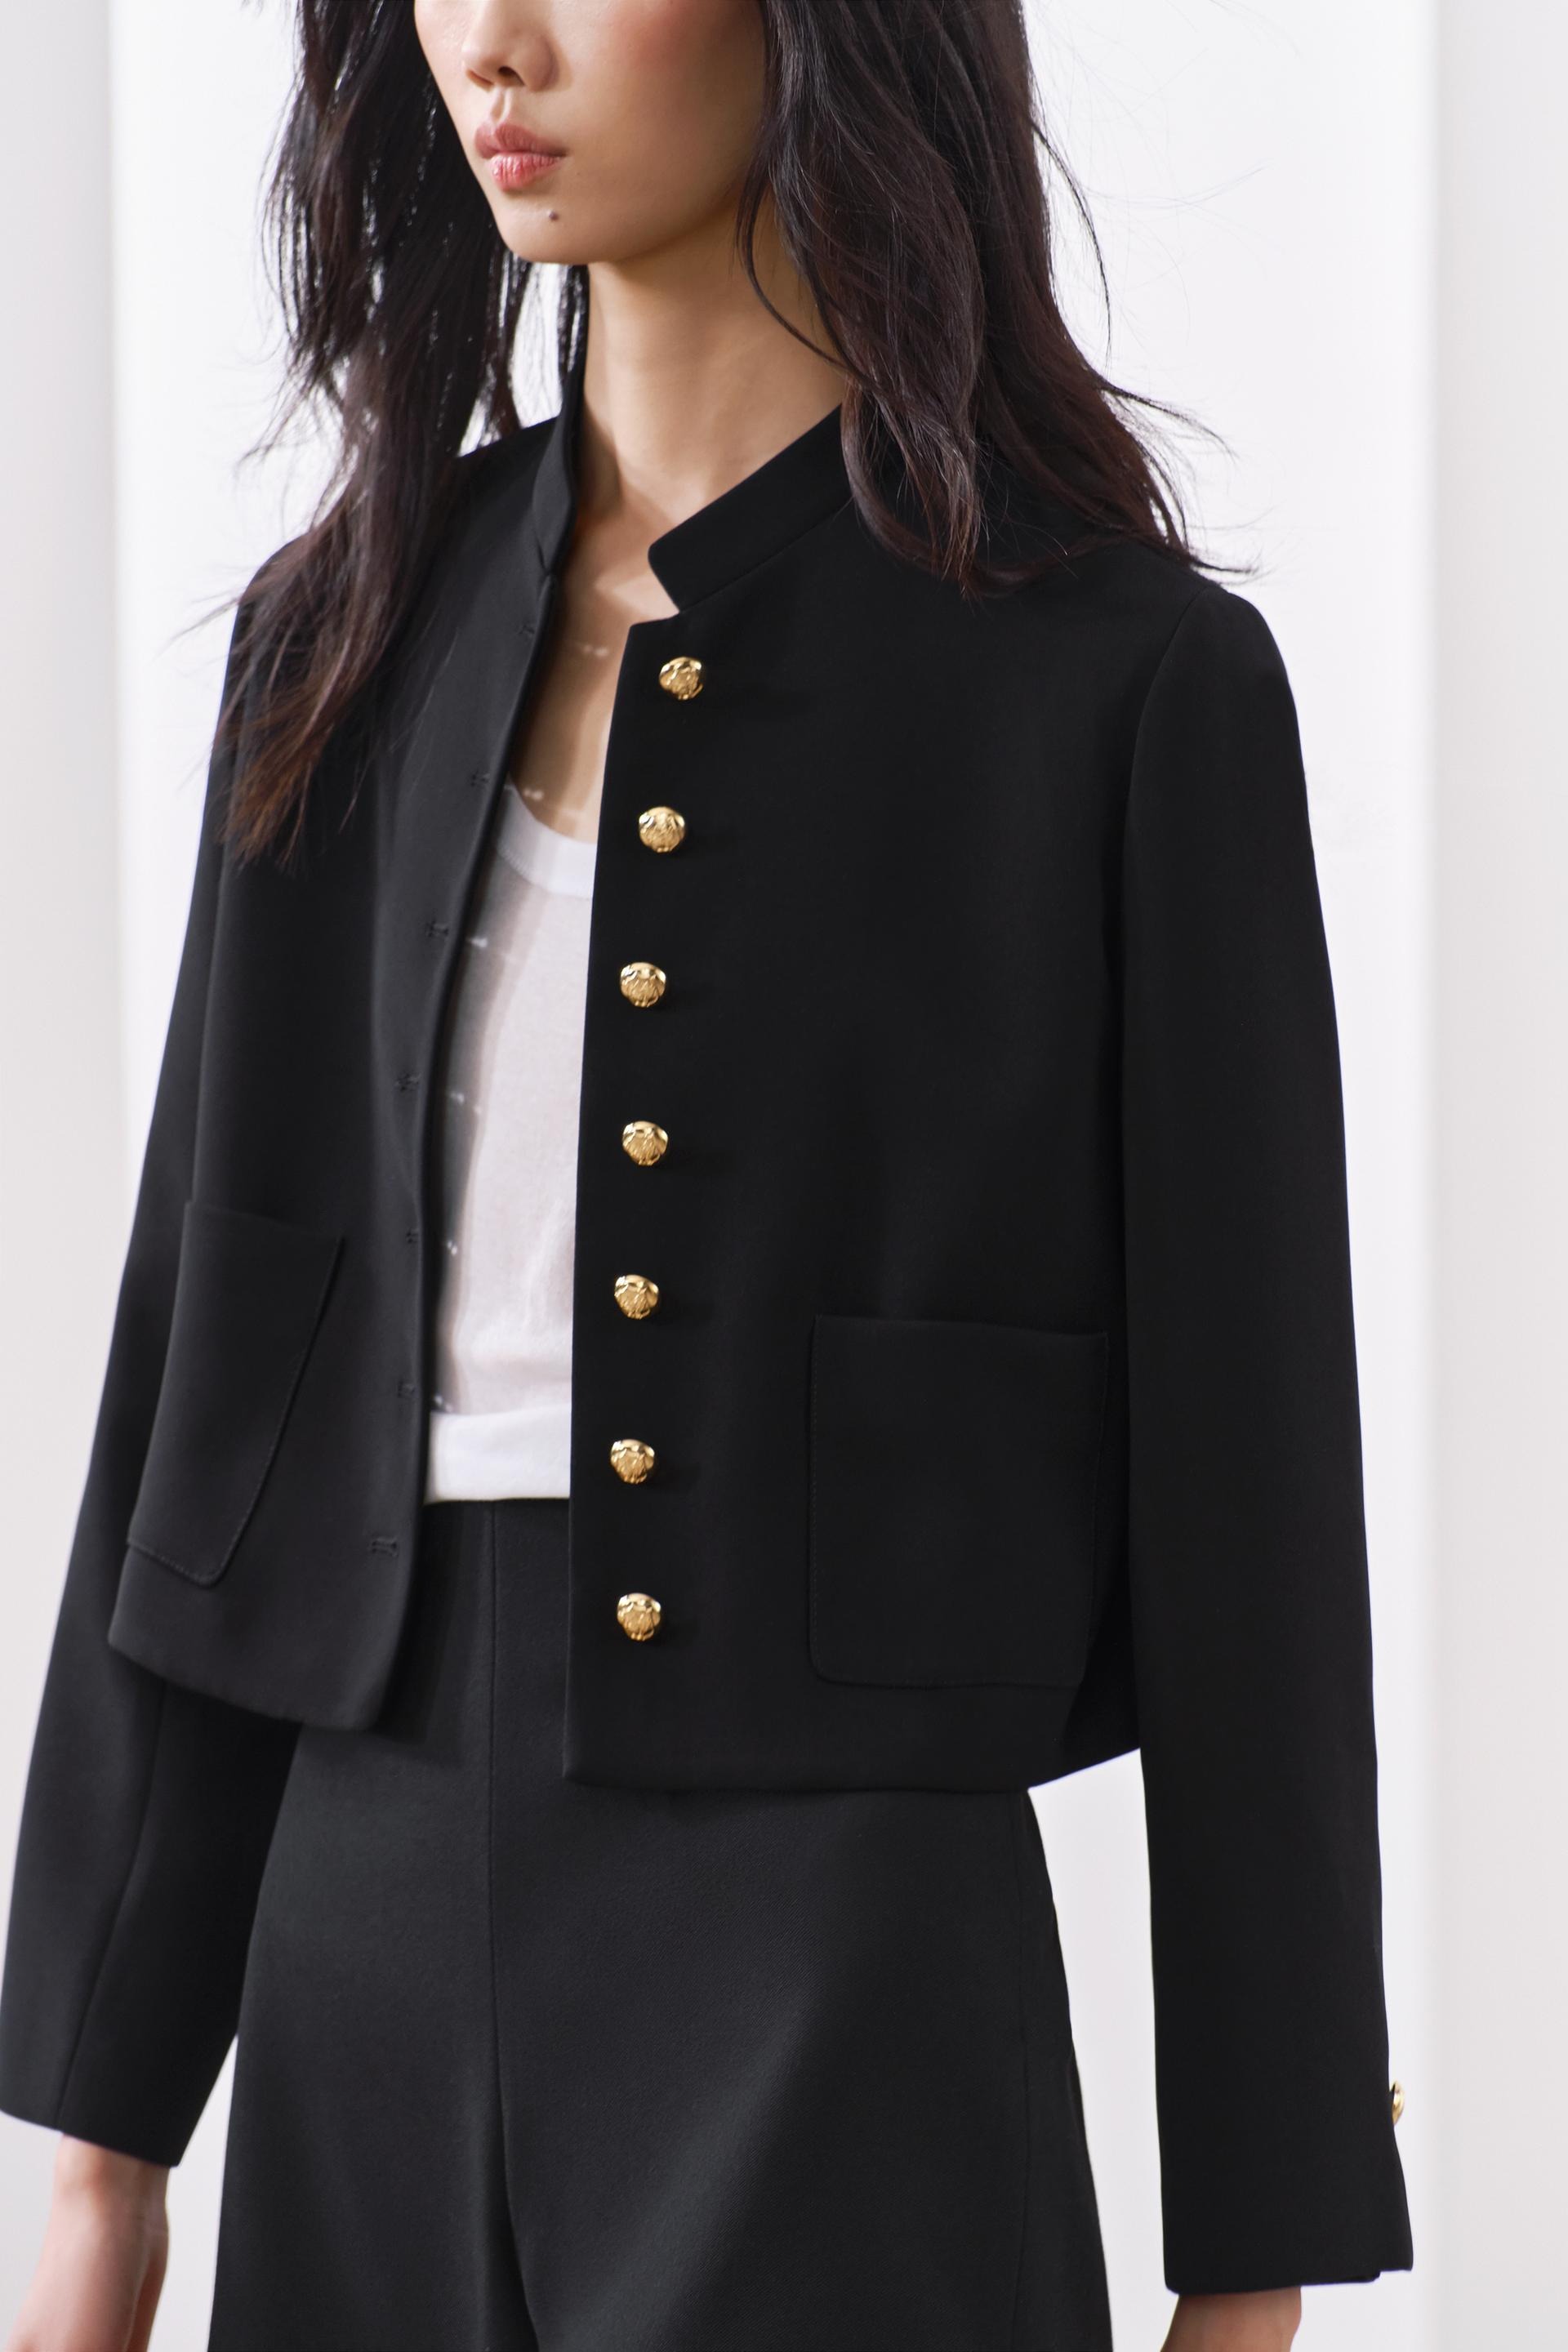 Black Zara jacket with gold buttons